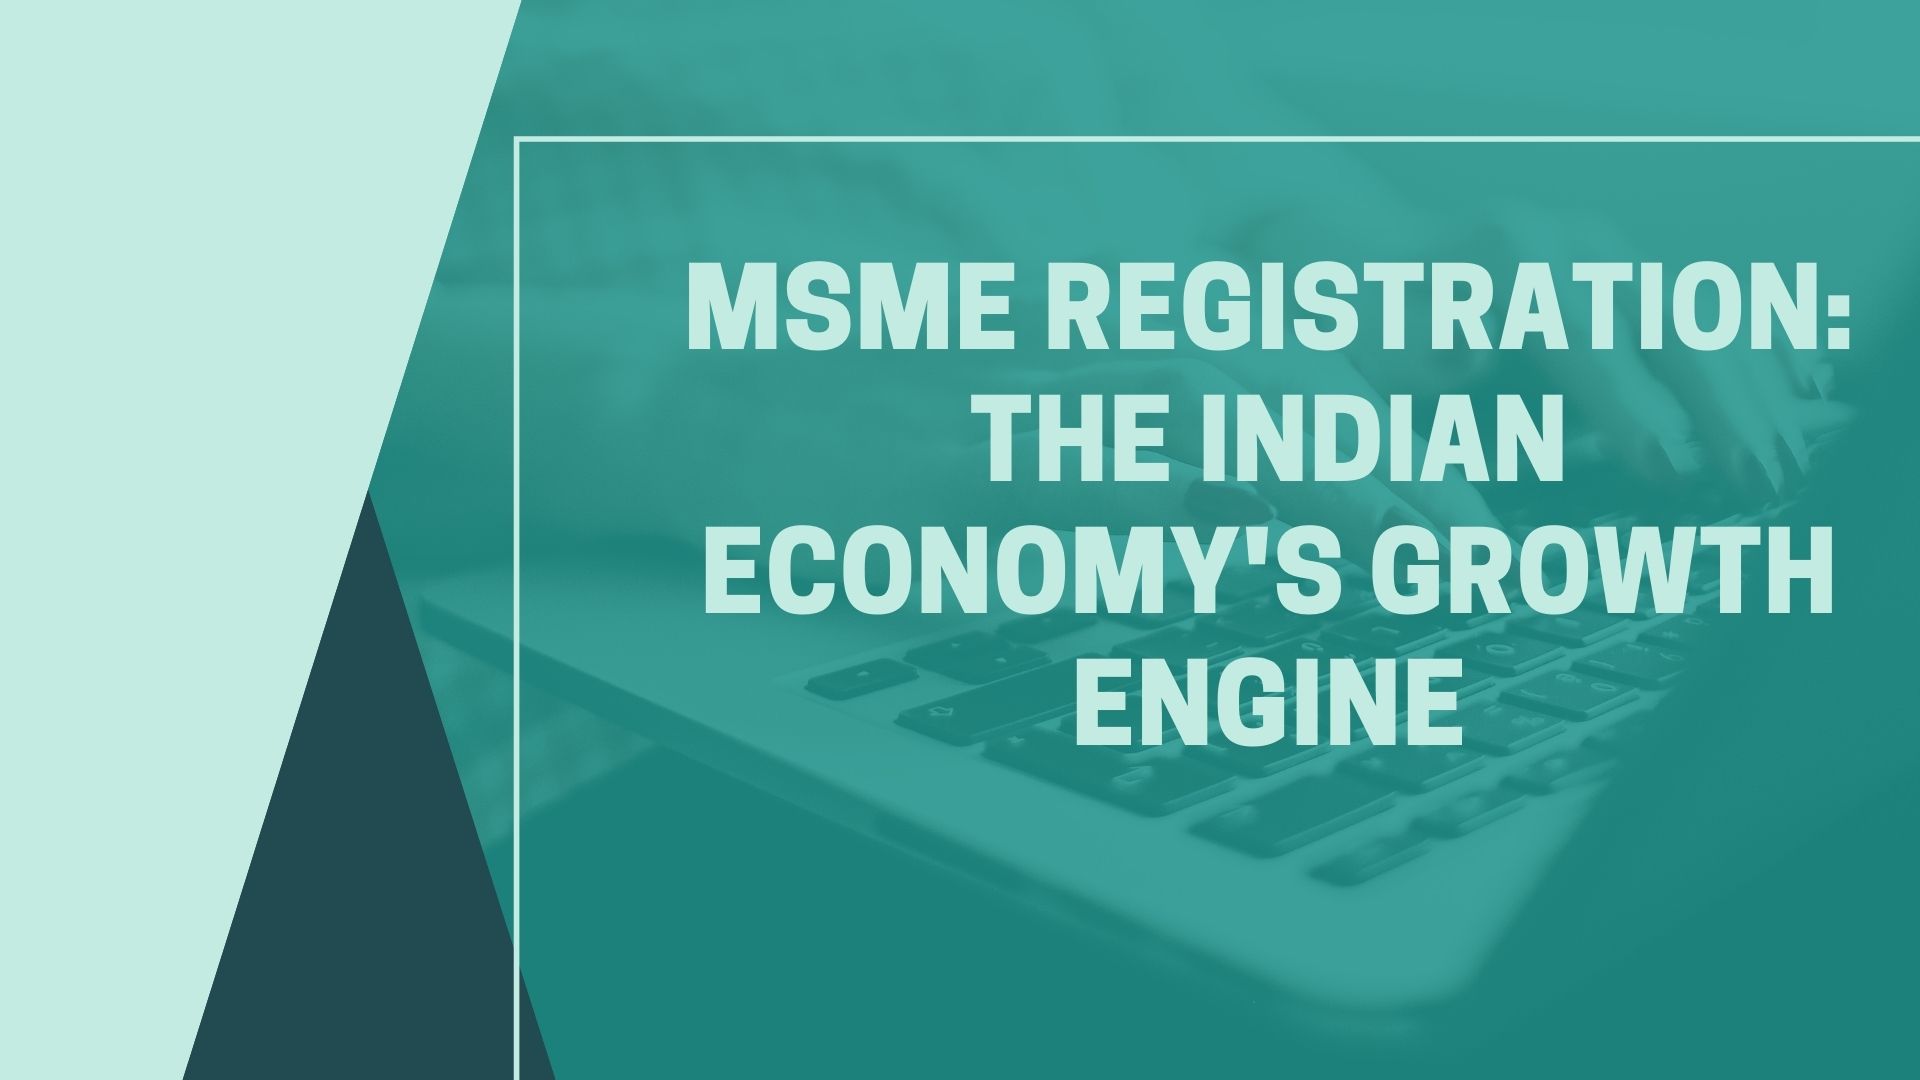 MSME REGISTRATION THE INDIAN ECONOMY'S GROWTH ENGINE (1)